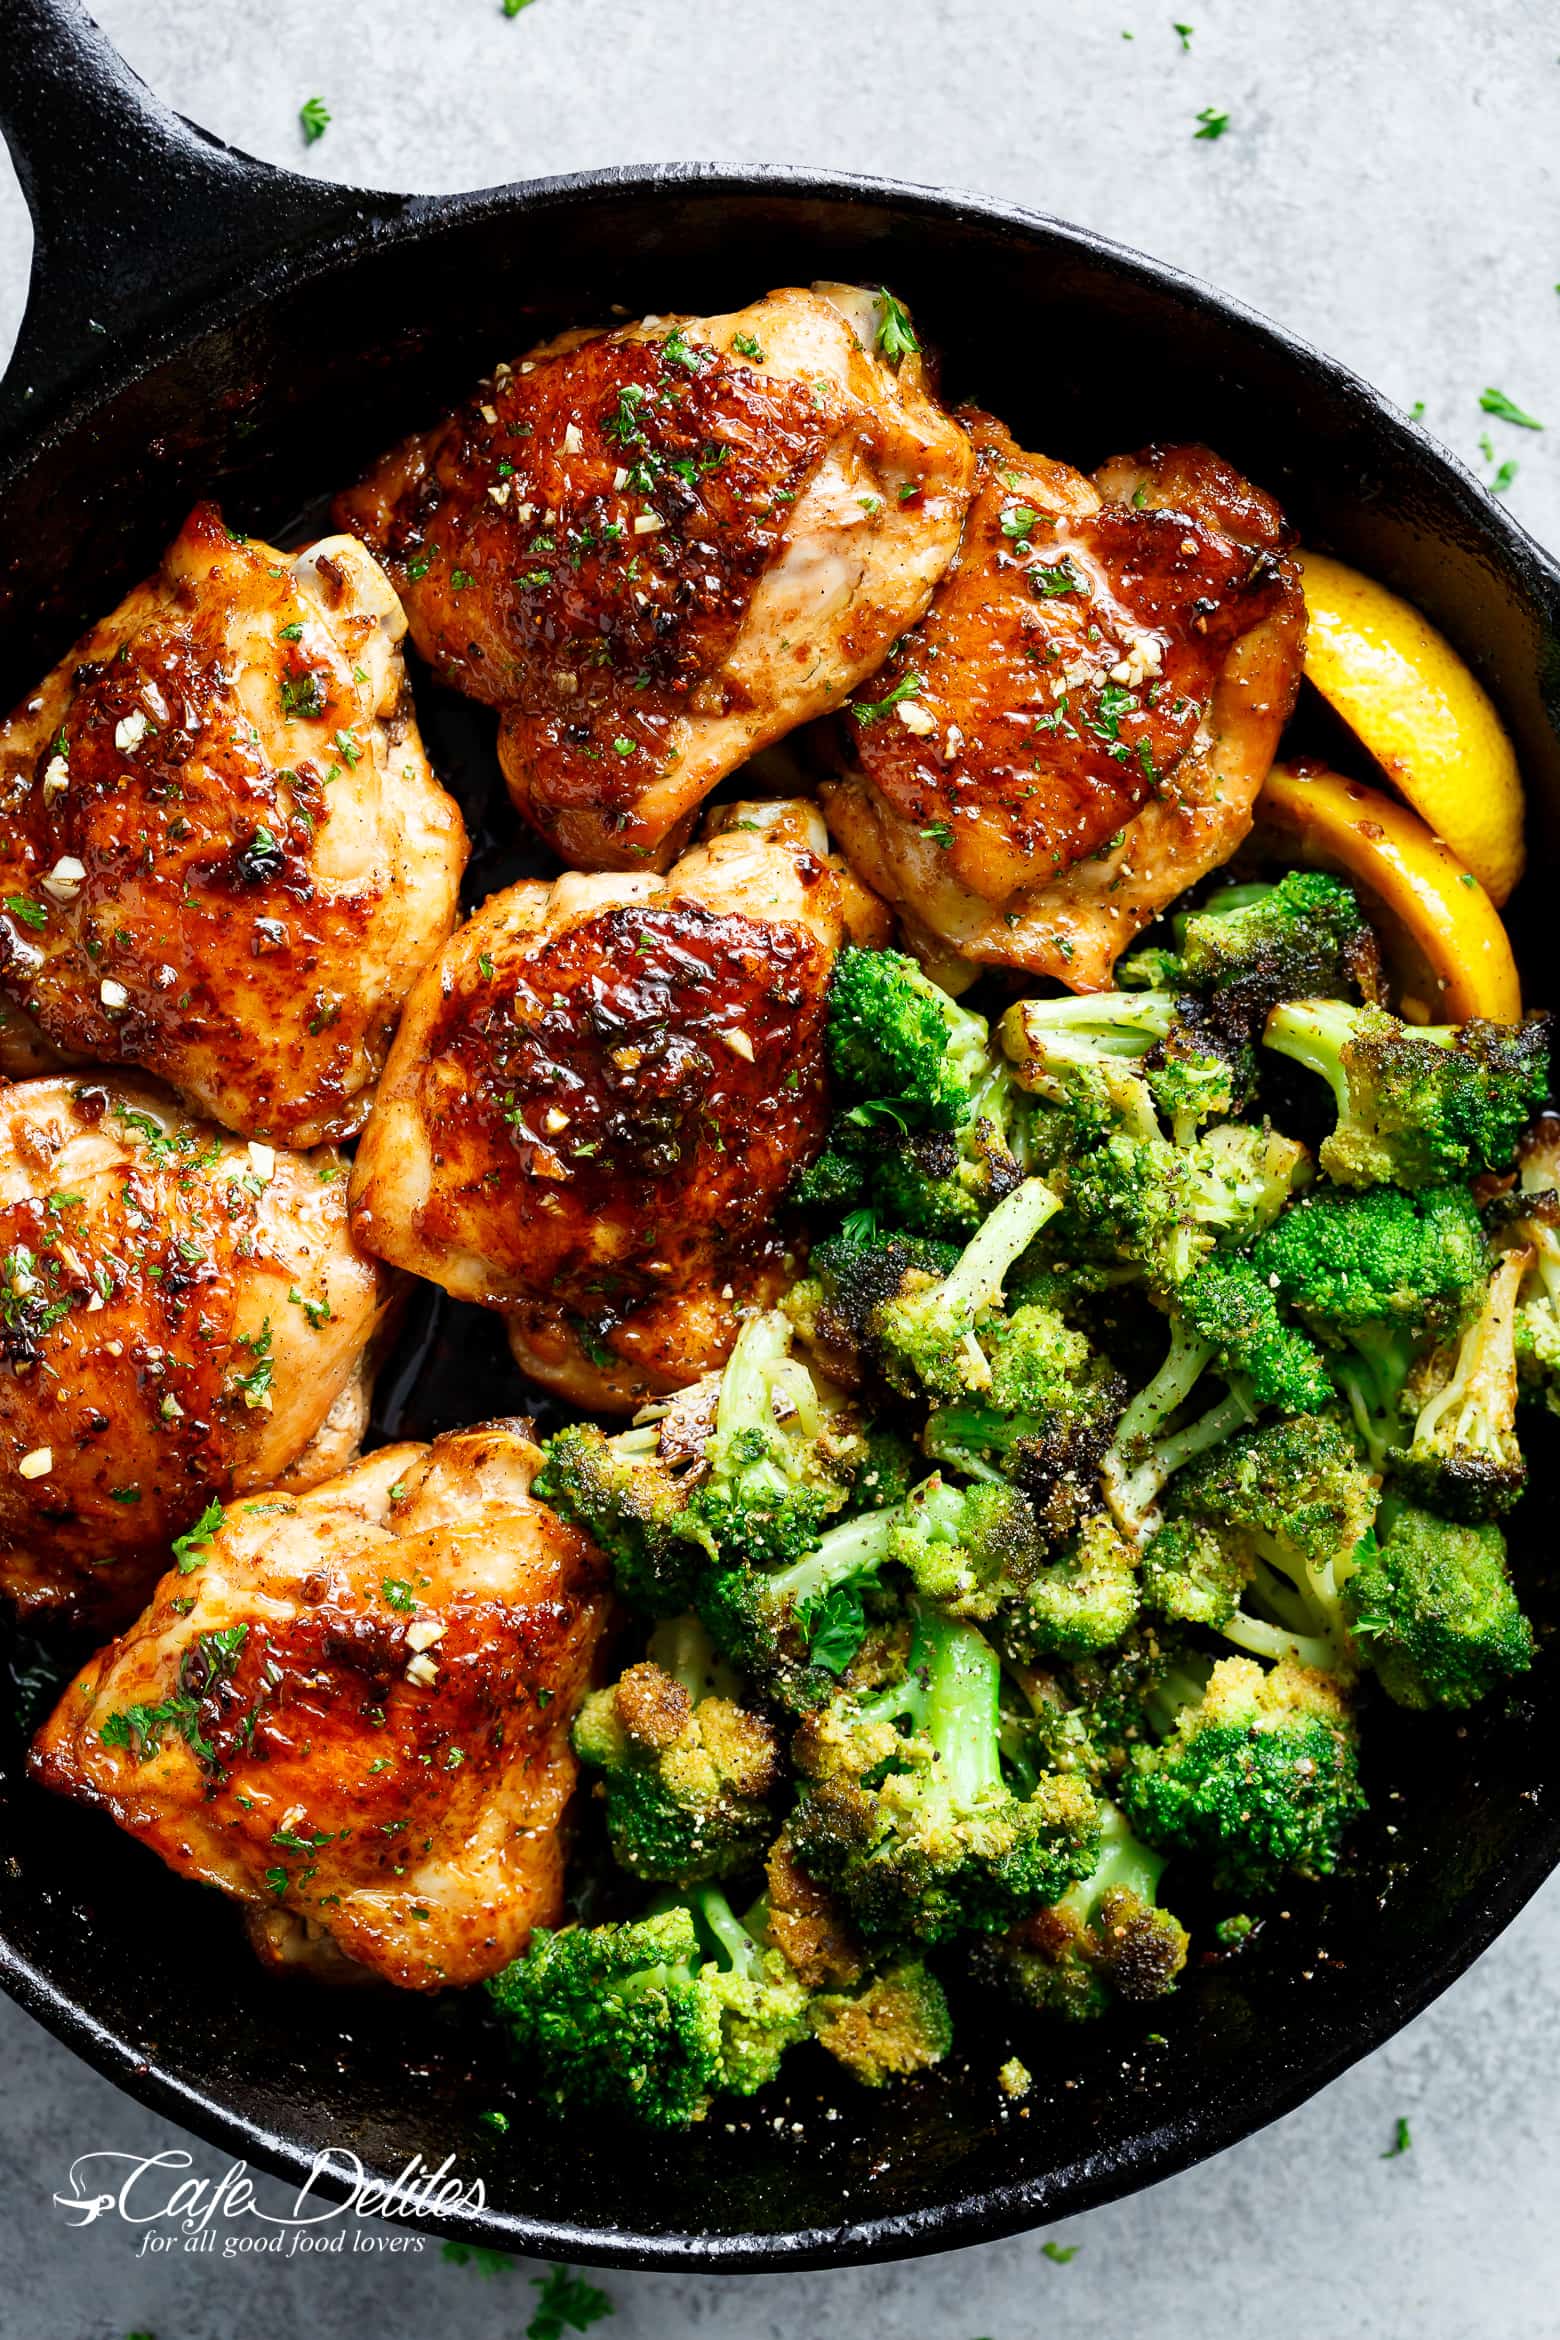 Browned Butter Honey Garlic Chicken is a deliciously simple recipe that has been requested time and time again! Chicken thighs OR breasts cooked in browned butter infused with honey, garlic and lemon juice. Simple ingredients and maximum flavours! | CAFEDELITES.COM